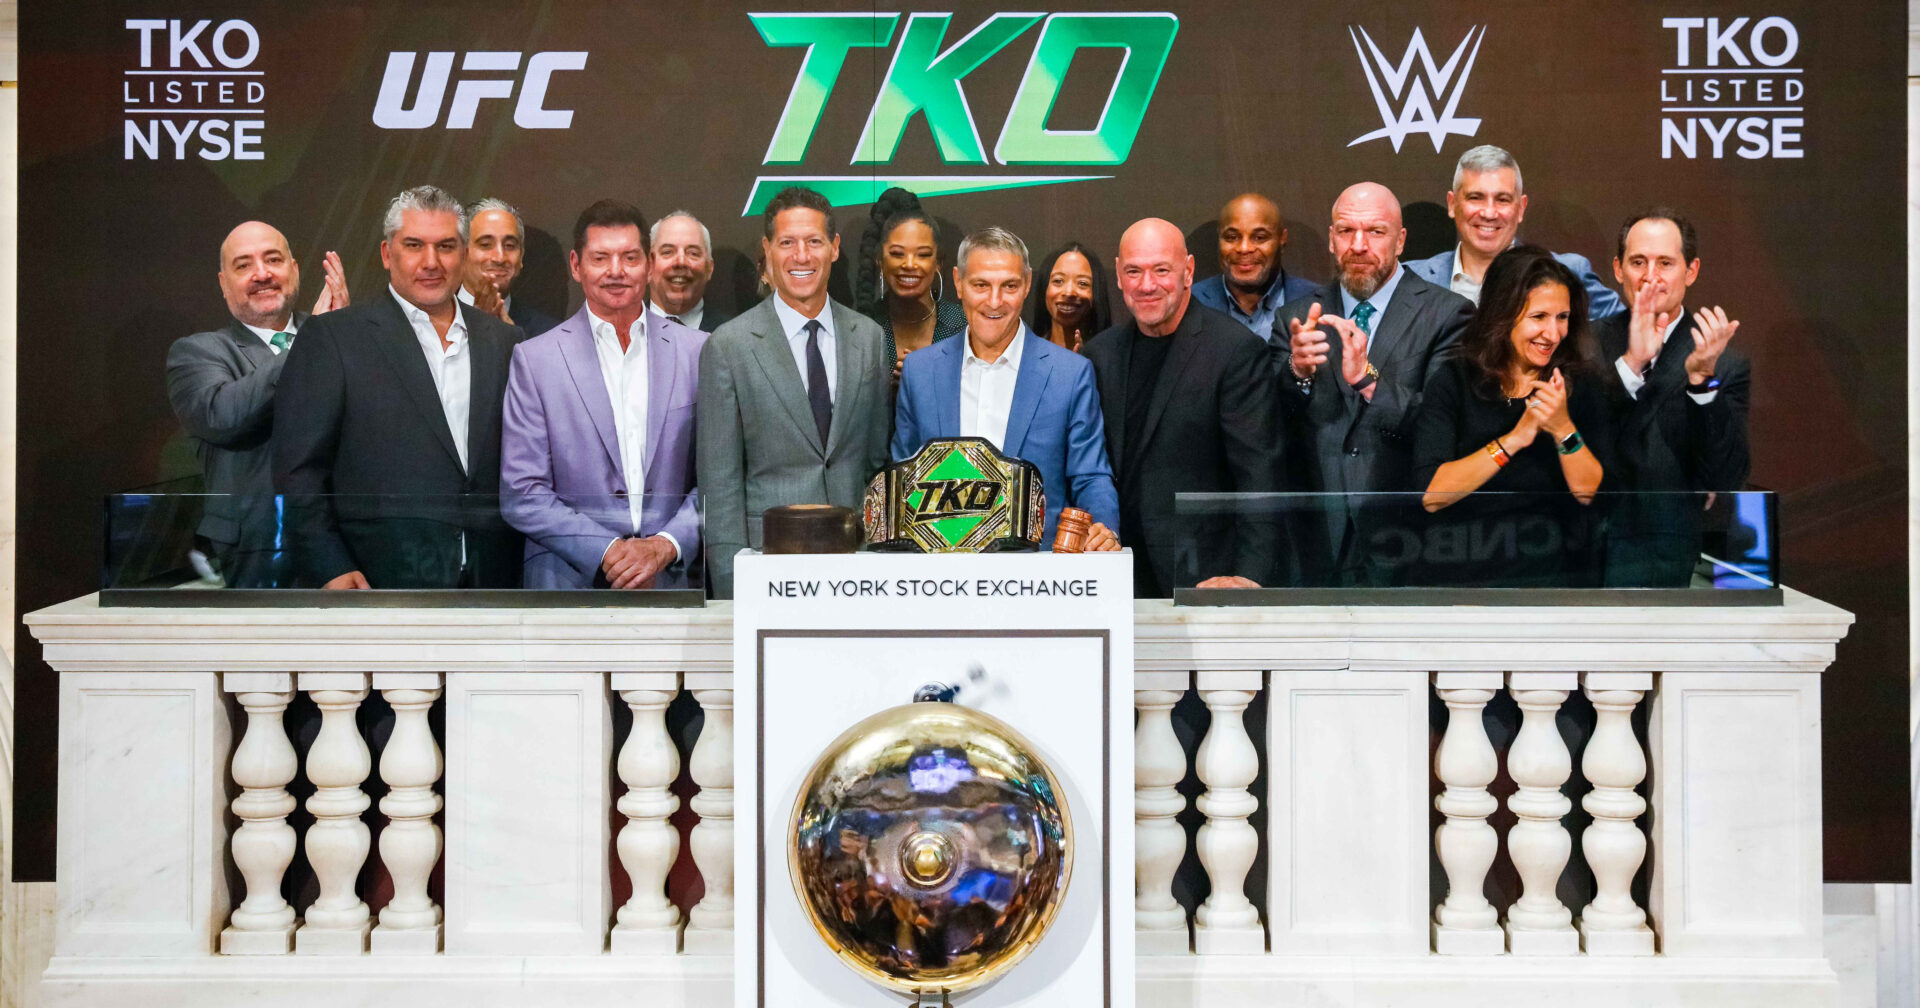 WWE & UFC Officially Merged To Form TKO Group Holdings, Vince McMahon and Ari Emanuel Comment